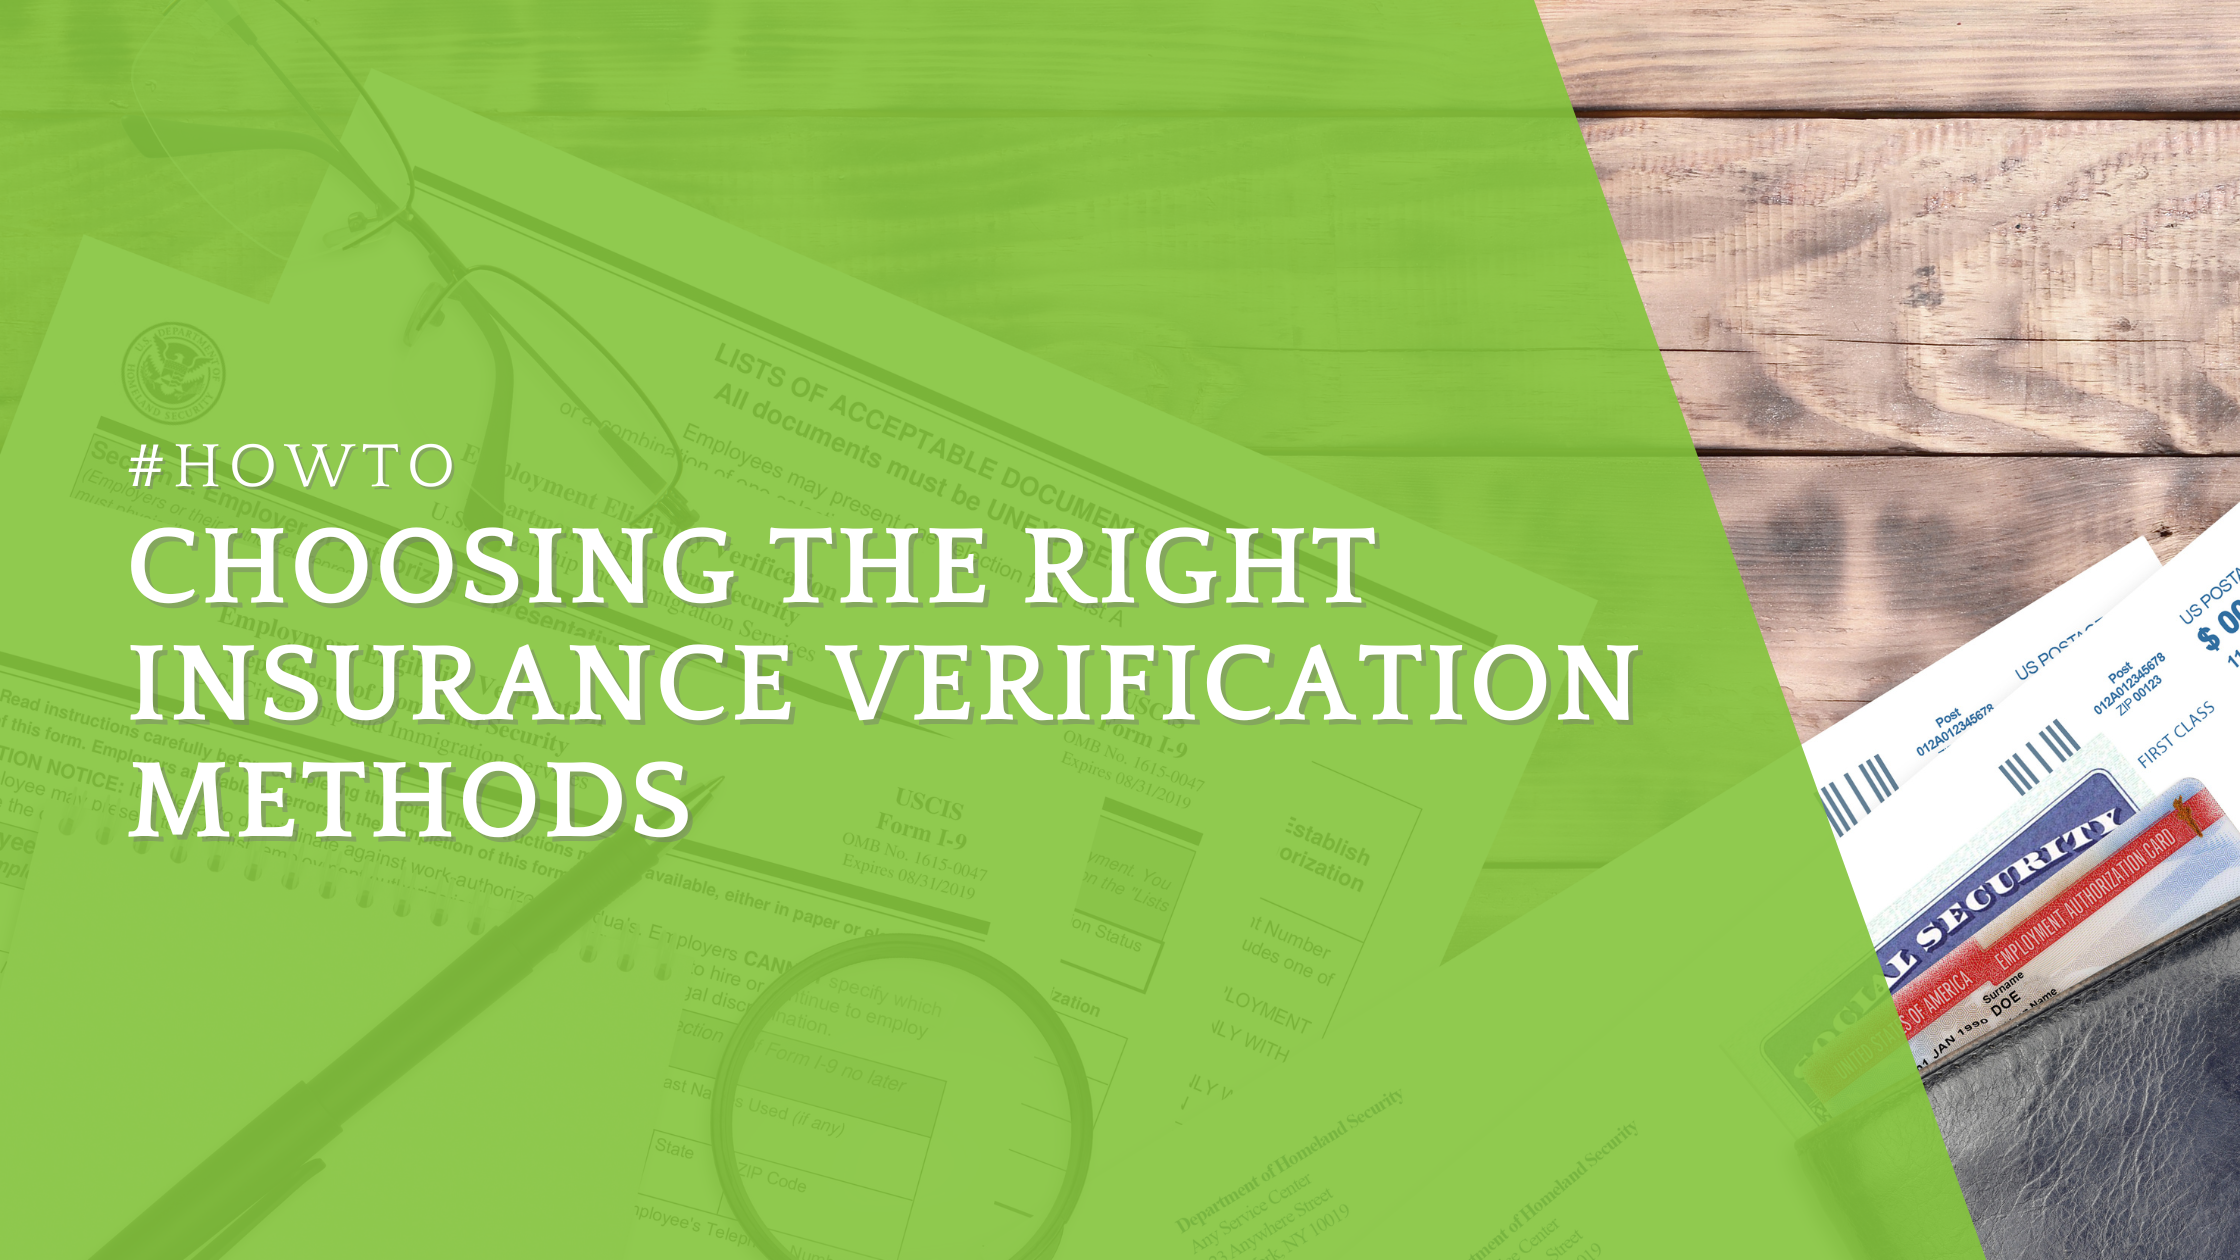 Choosing the Right Insurance Verification Methods for Your Dental Practice